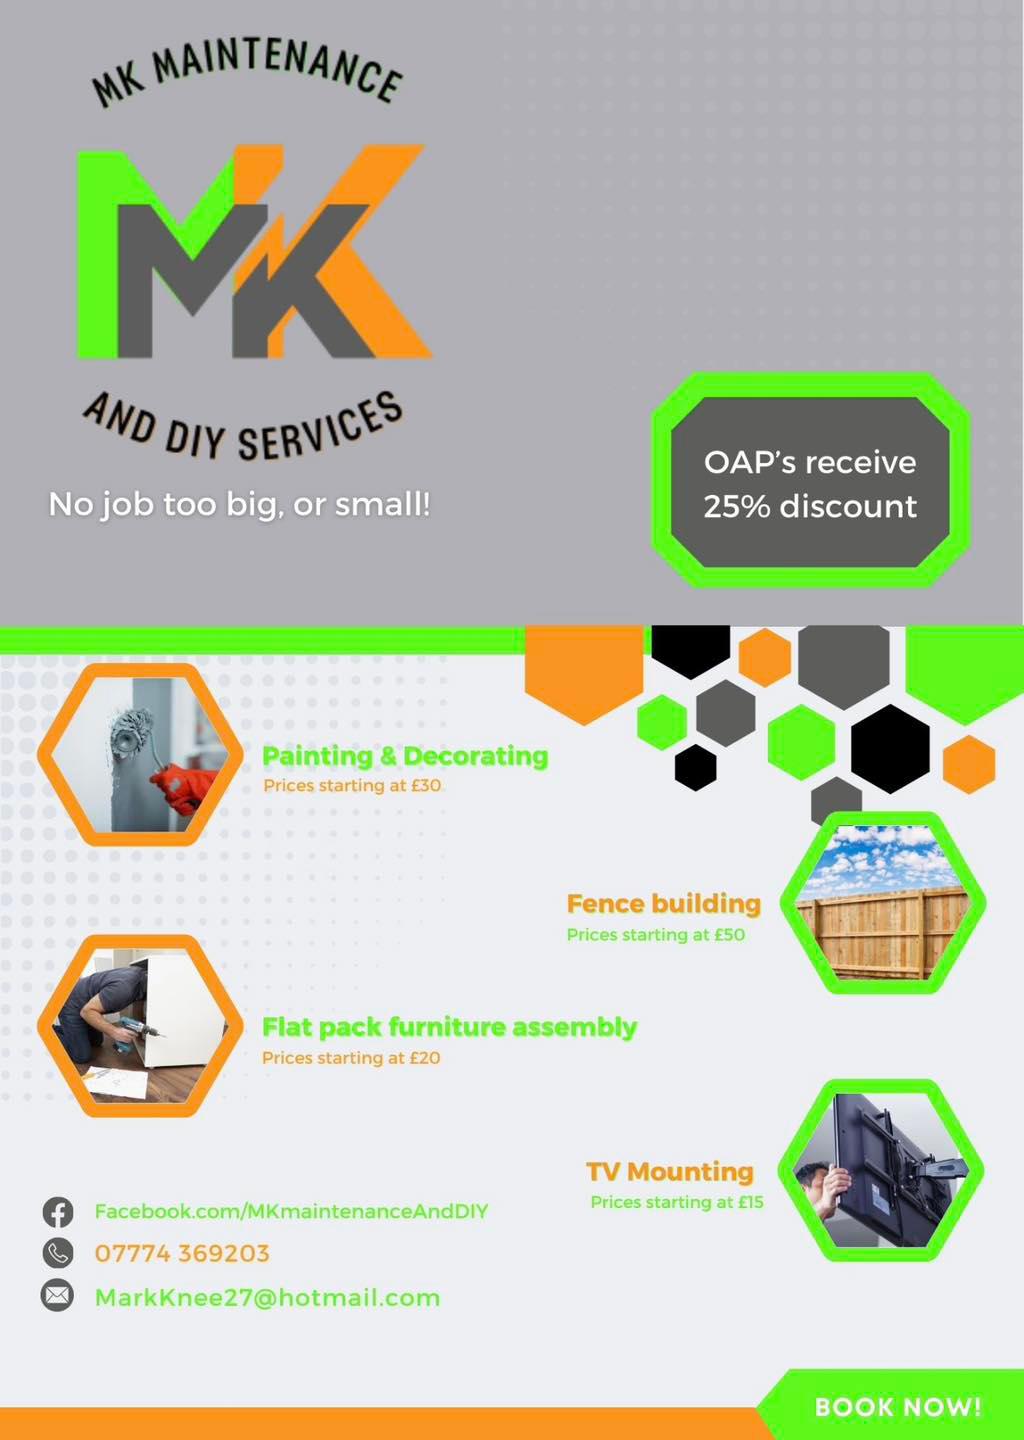 Images MK Maintenance and DIY Services